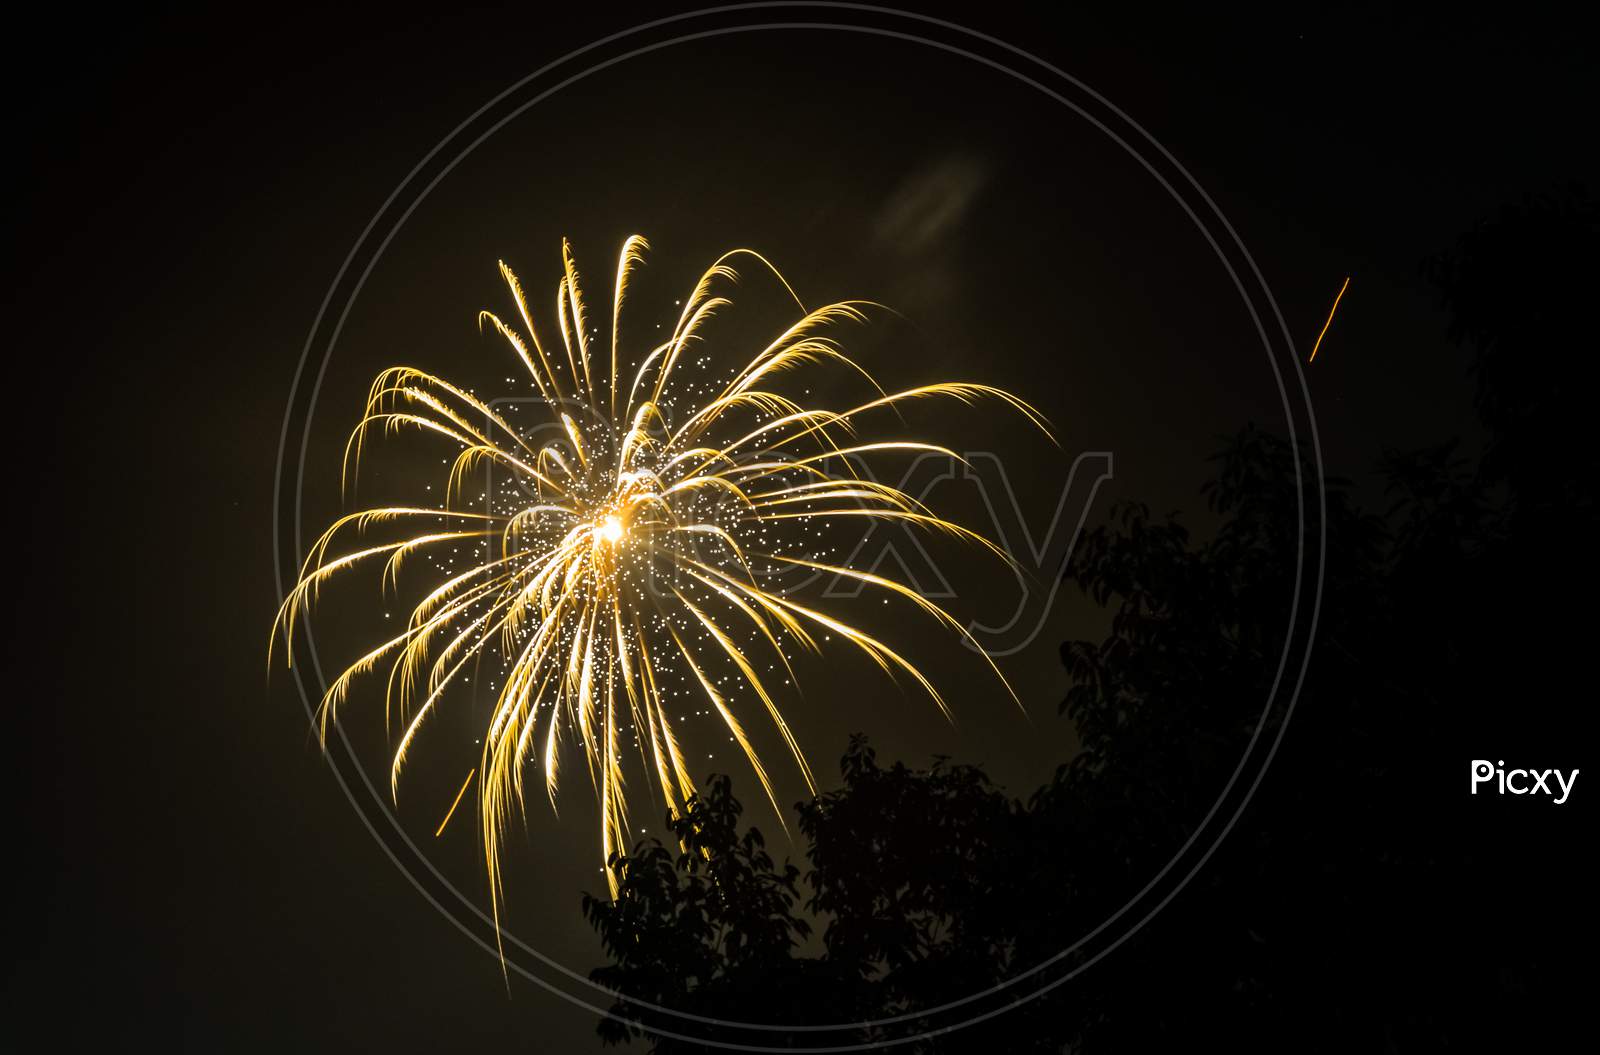 Yellow Fireworks At Night Sky With Visible Trees